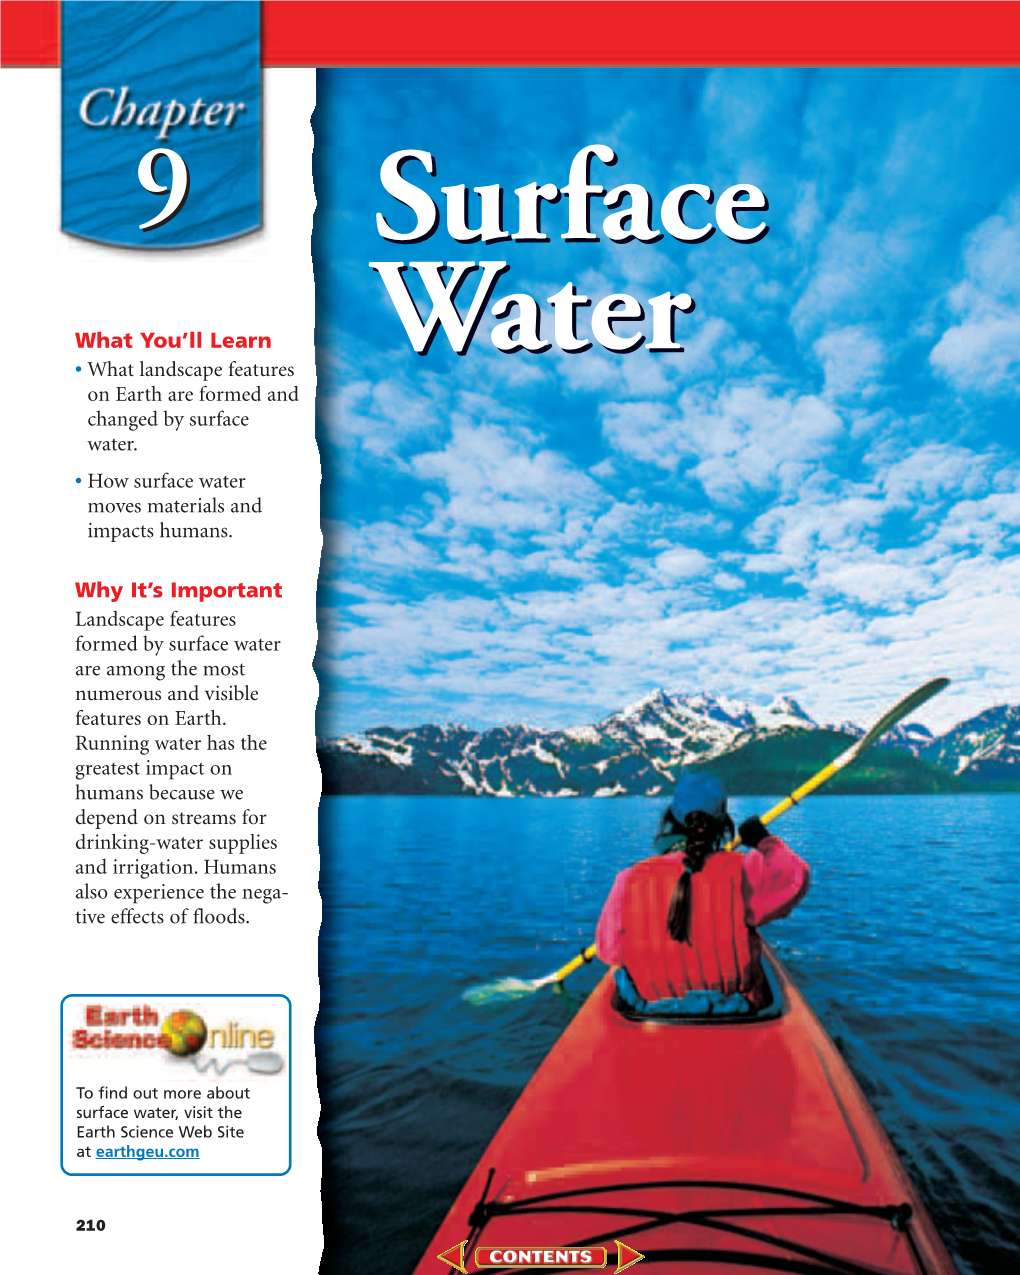 Chapter 9: Surface Water